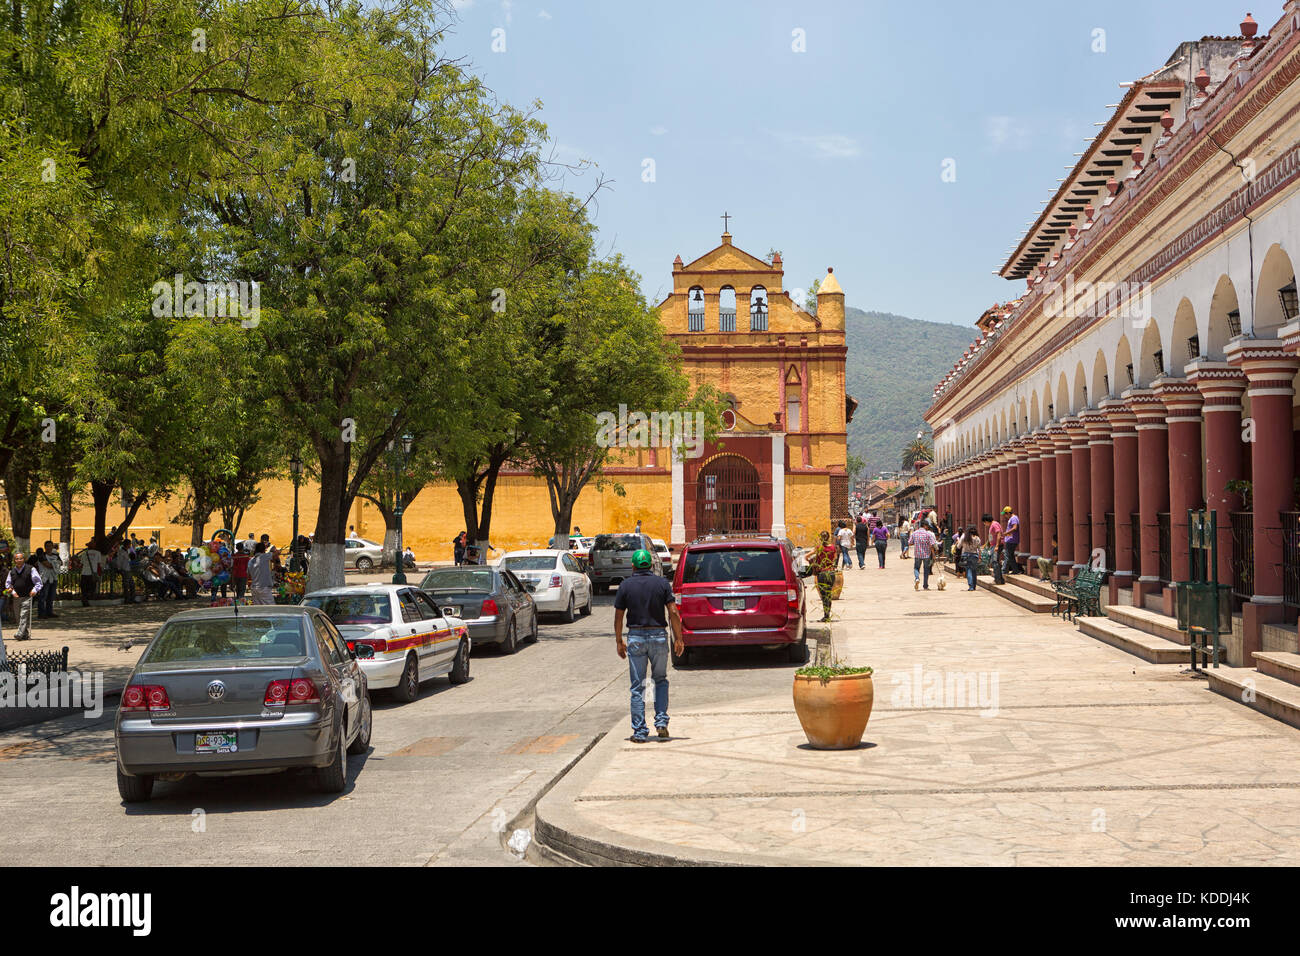 April13, 2014 San Cristobal de las Casas, Mexico: cars lining up on the street in the historic center of the colonial tourist town Stock Photo